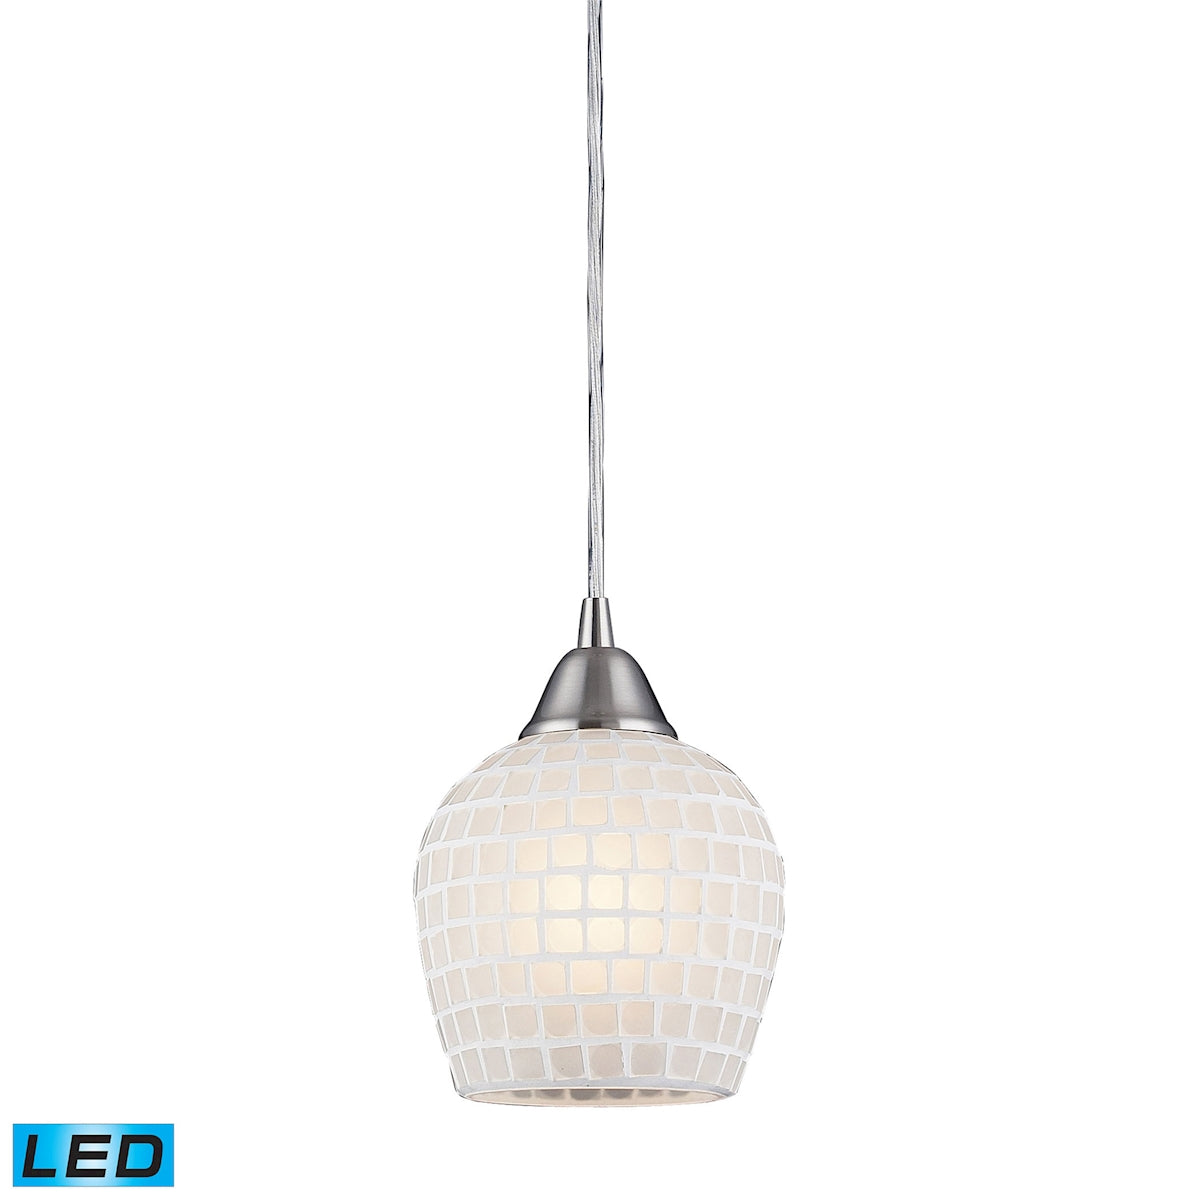 Fusion 1-Light Mini Pendant in Satin Nickel with White Mosaic Glass - Includes LED Bulb